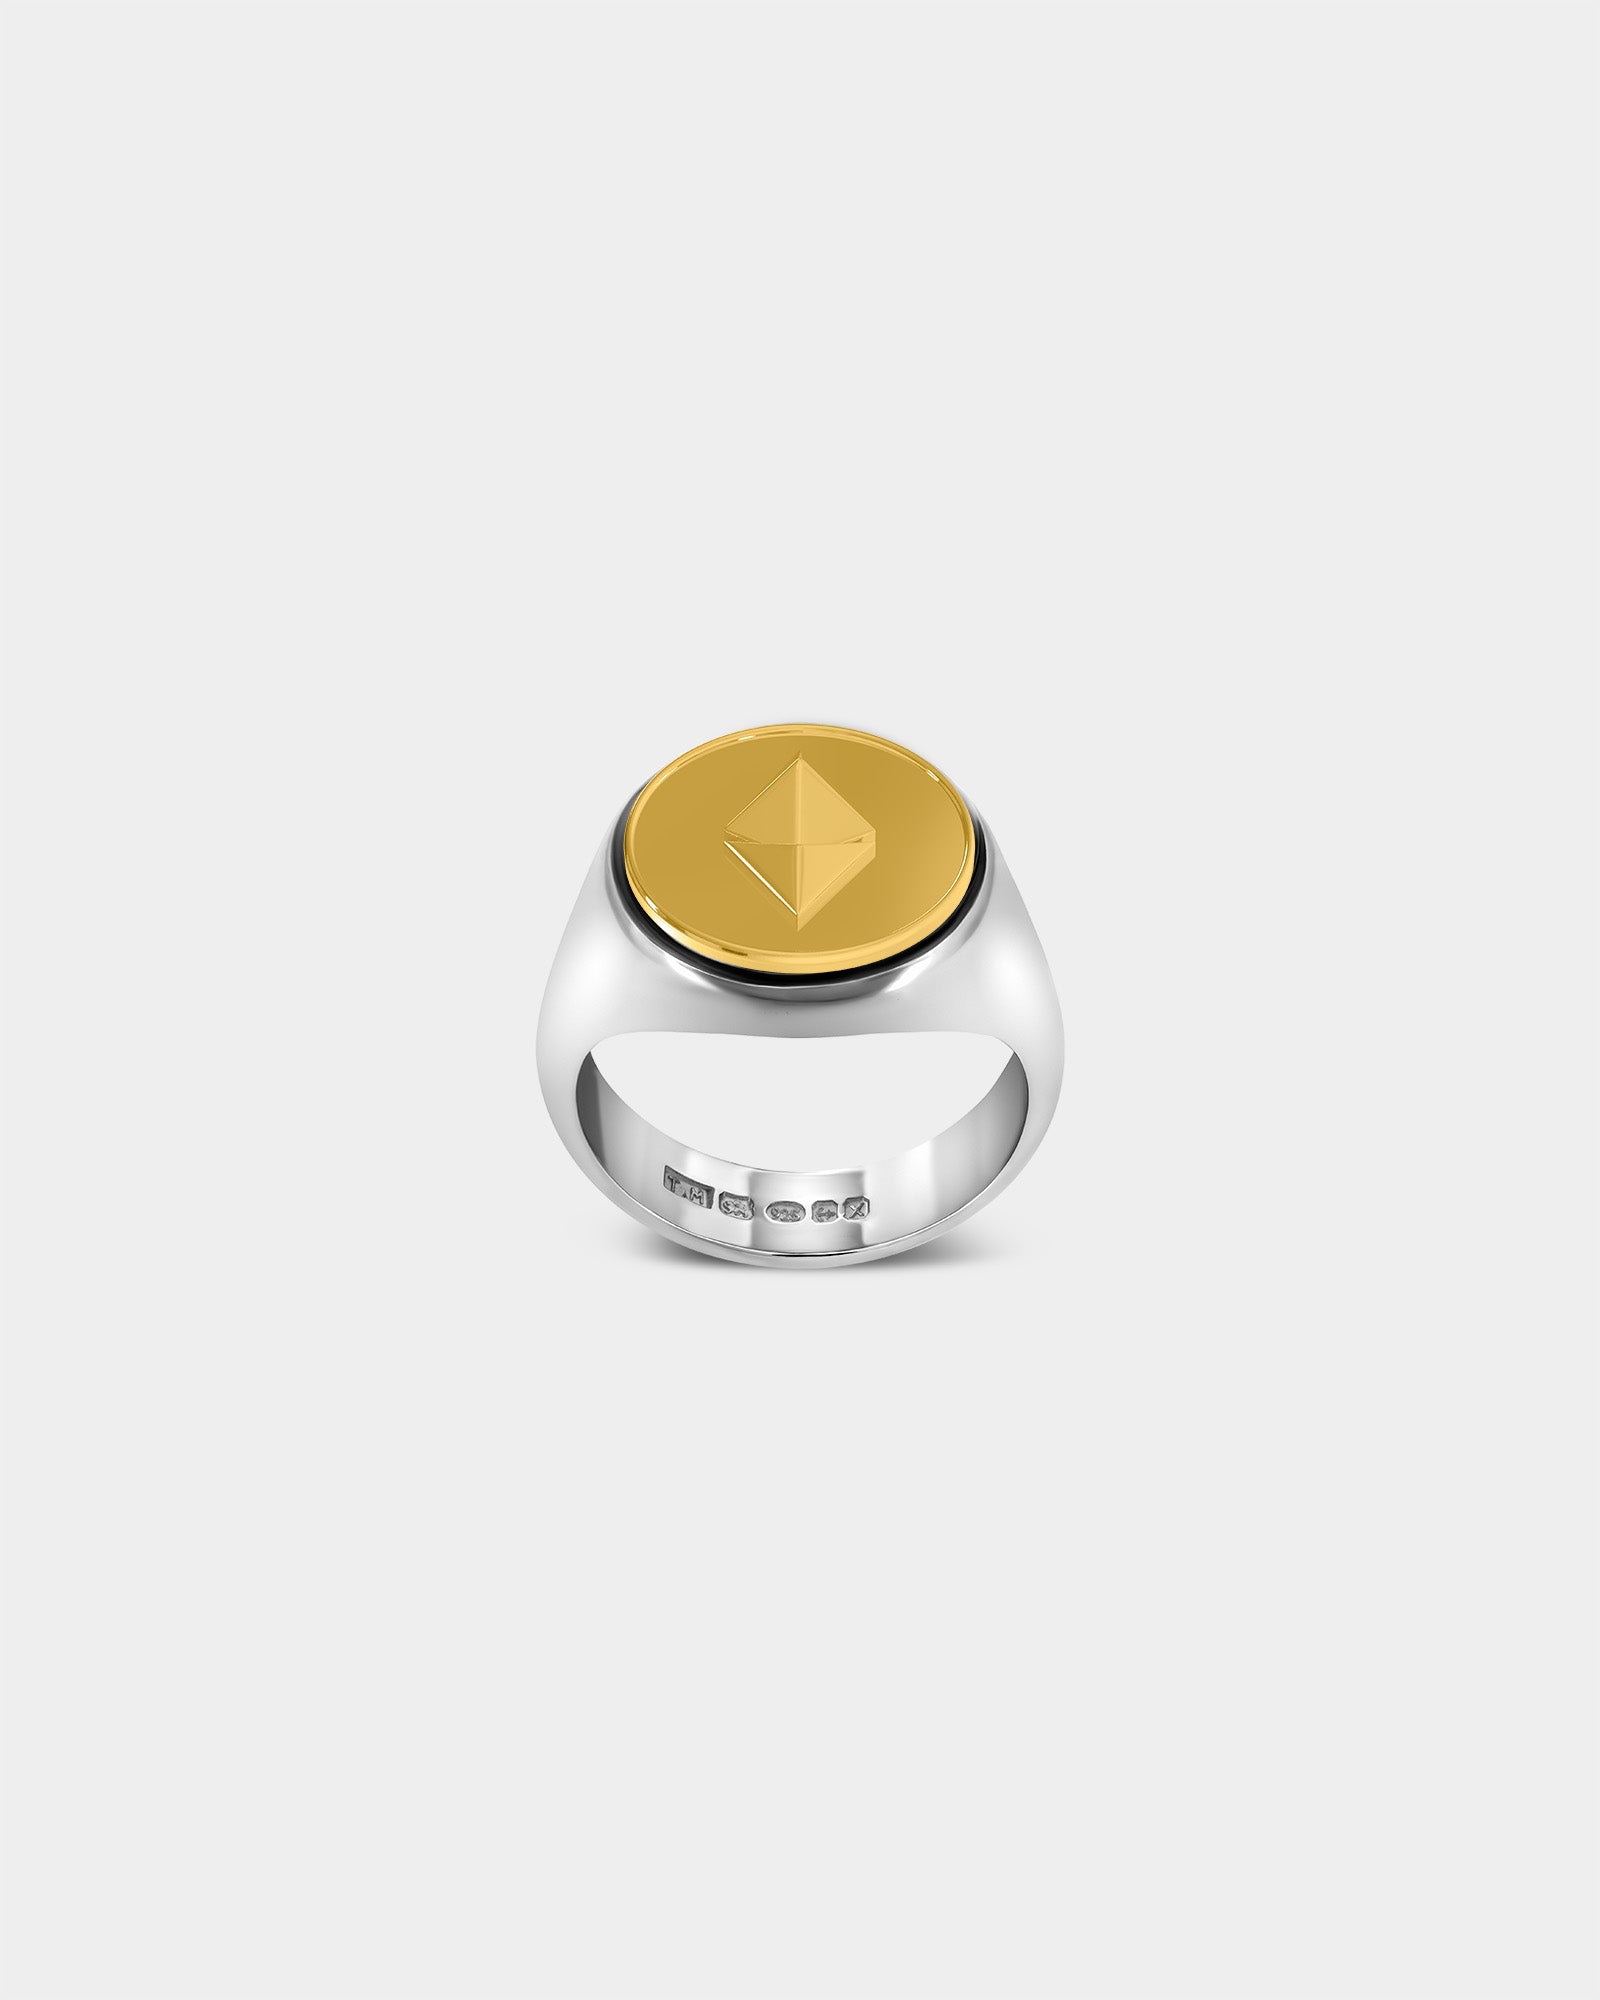 Large Ethereum Crypto Ring in Sterling Silver / 9k Yellow Gold by Wilson Grant